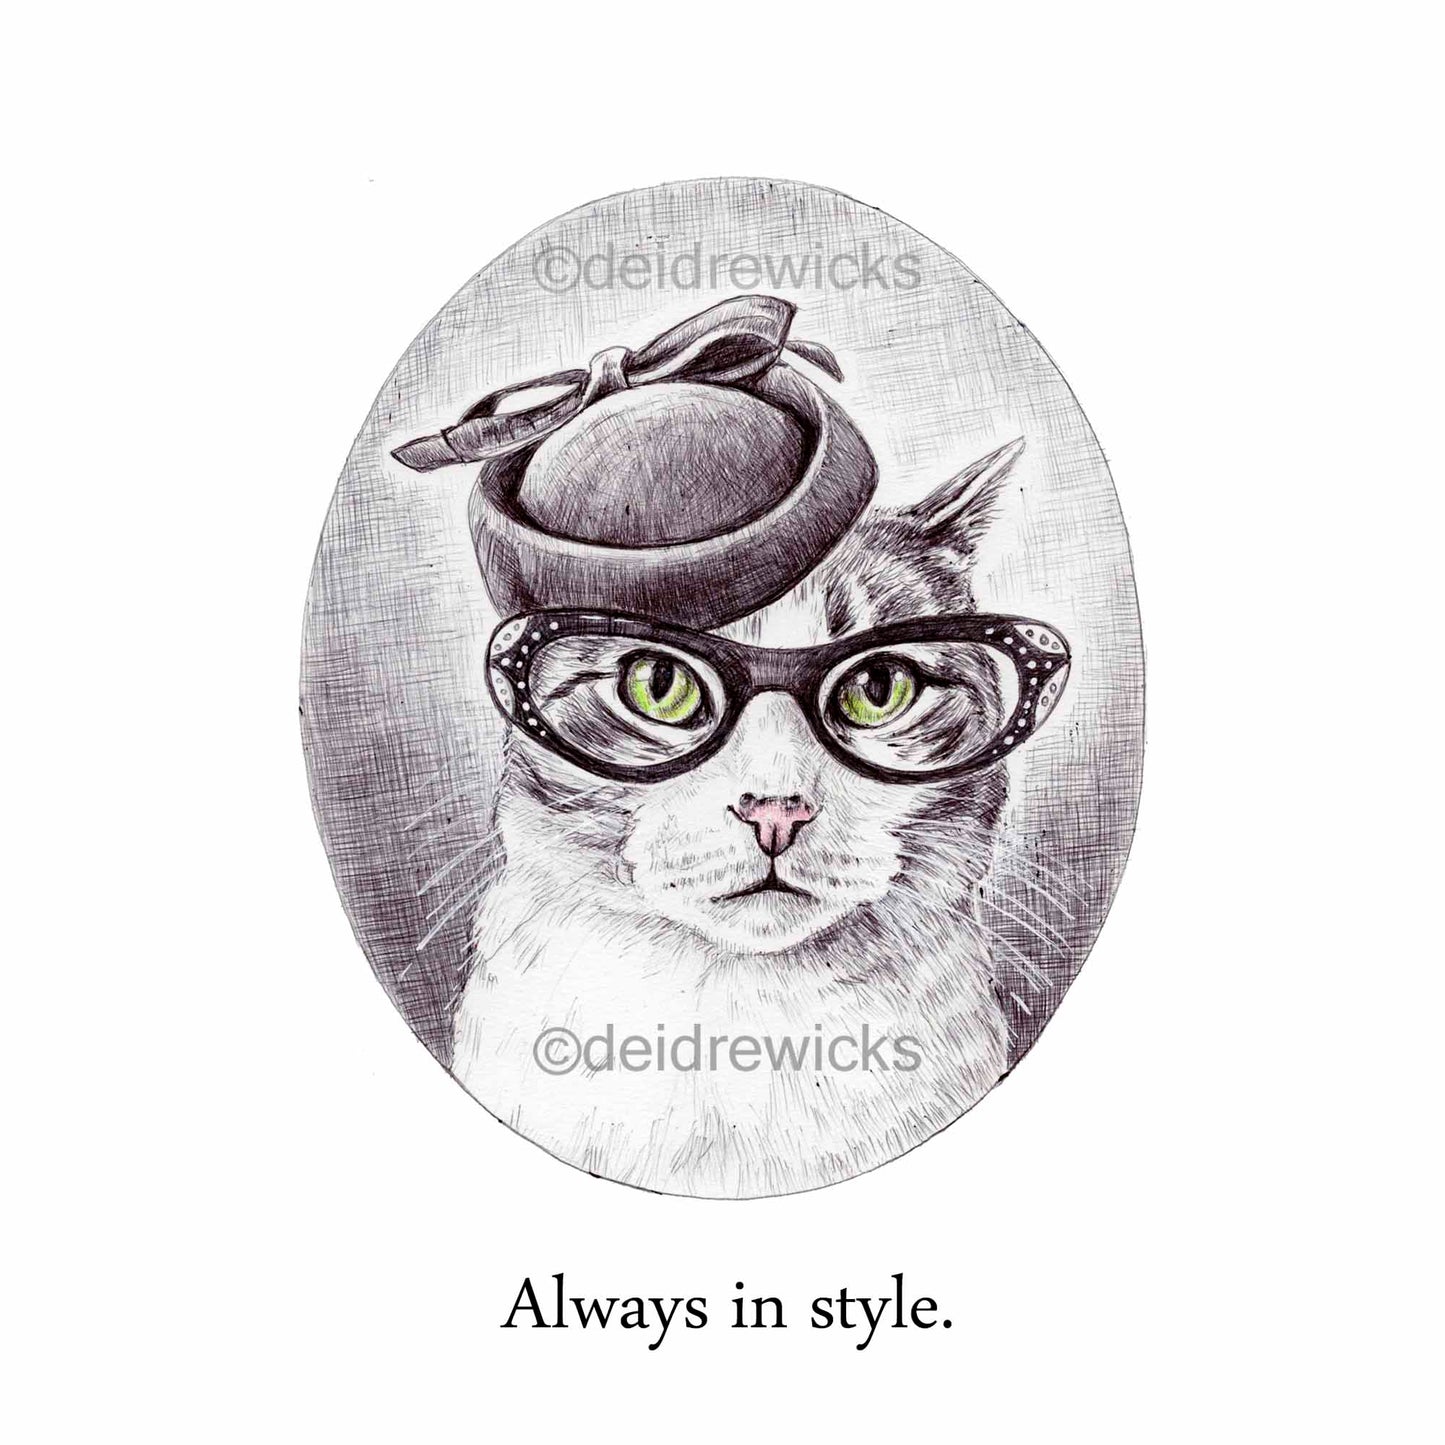 Ballpoint pen drawing of a tabby cat wearing a vintage bill pox hat and cat-eye glasses